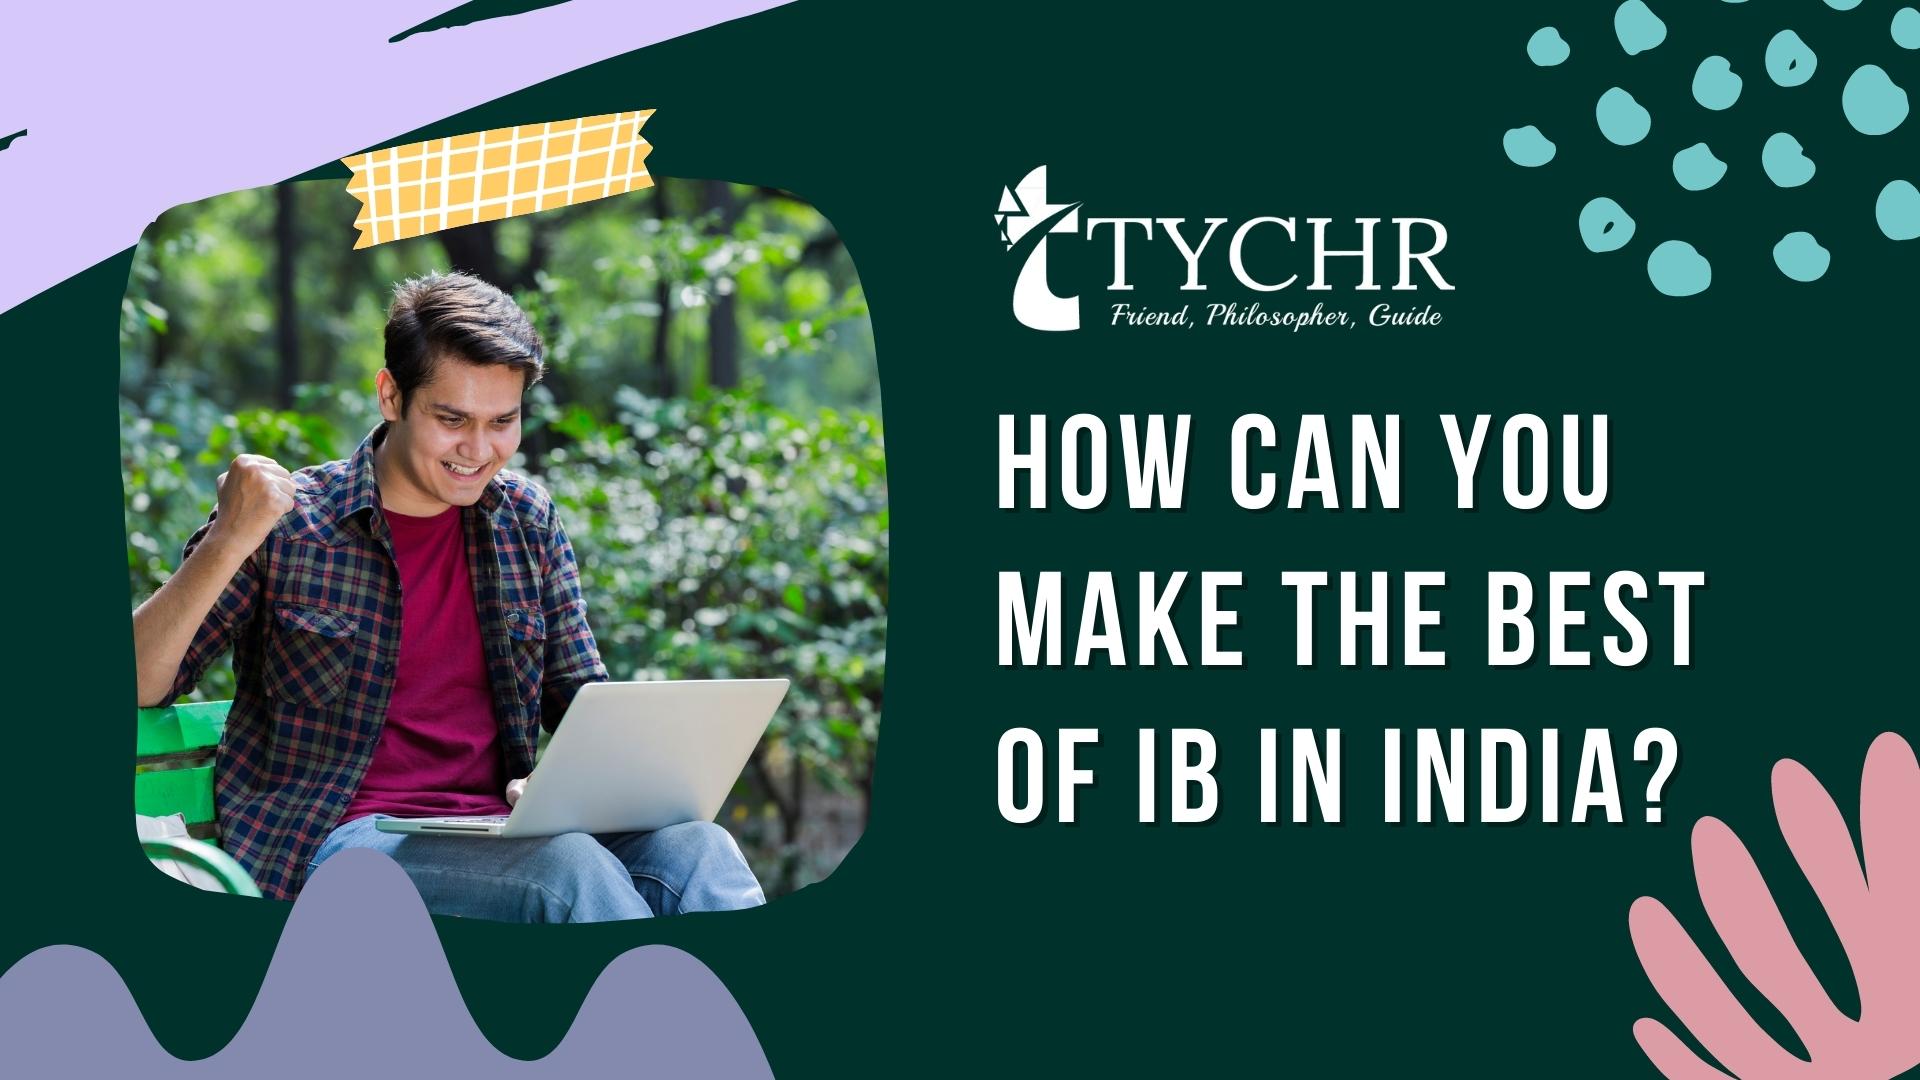 How can you make the best of IB in India